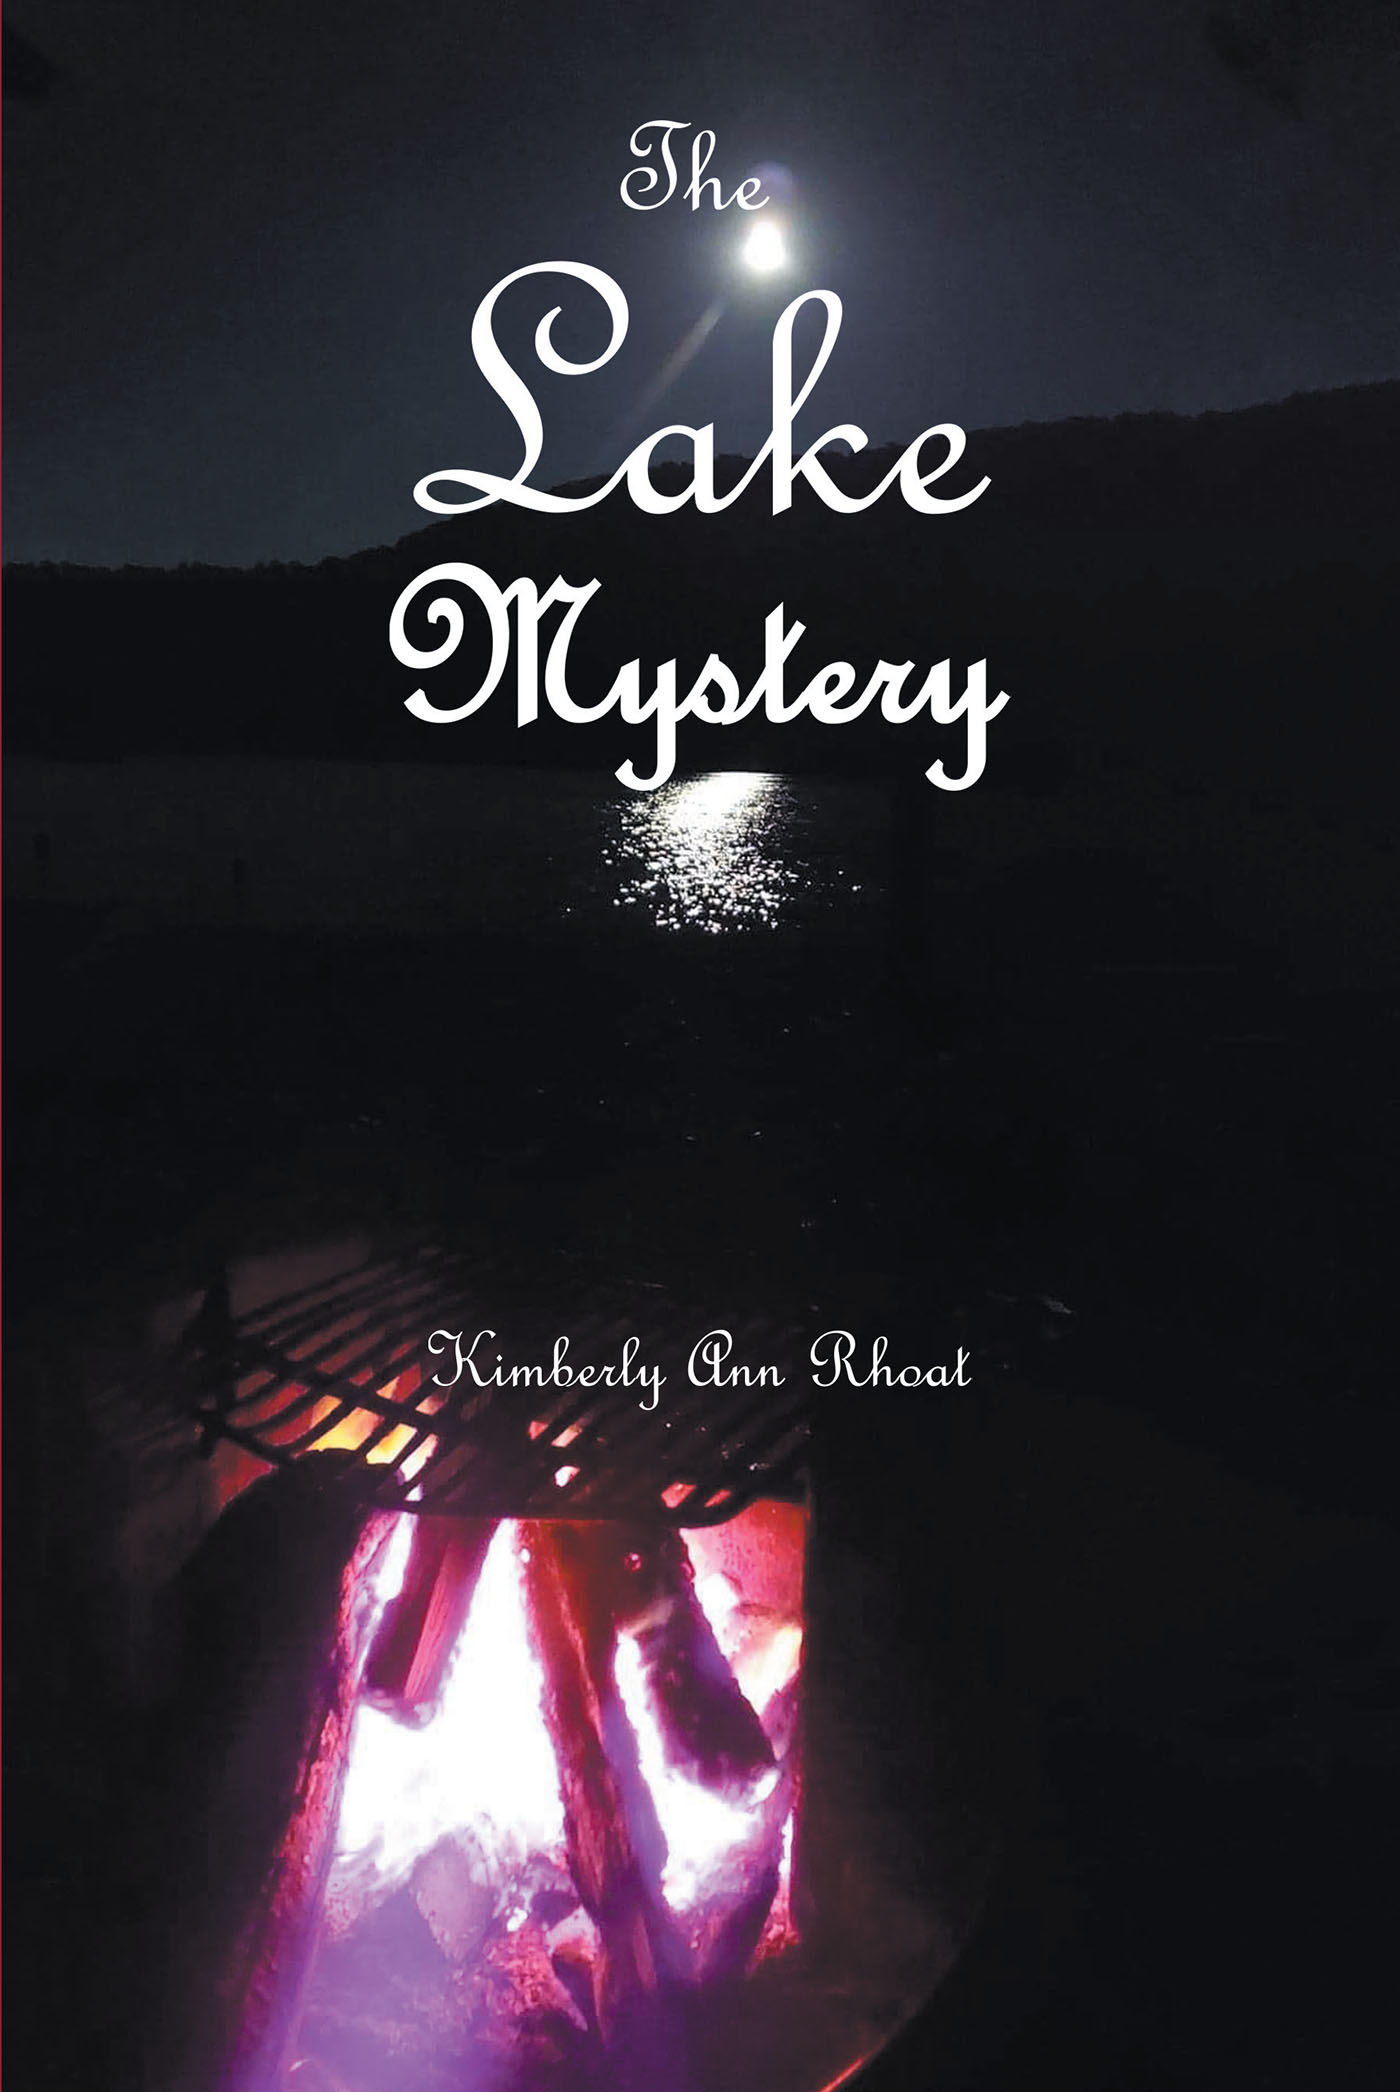 Author Kimberly Ann Rhoat’s New Book, "The Lake Mystery," Follows a Family's Lakeside Refuge That Slowly Devolves Into a Mystery of a Creature Living Below the Surface